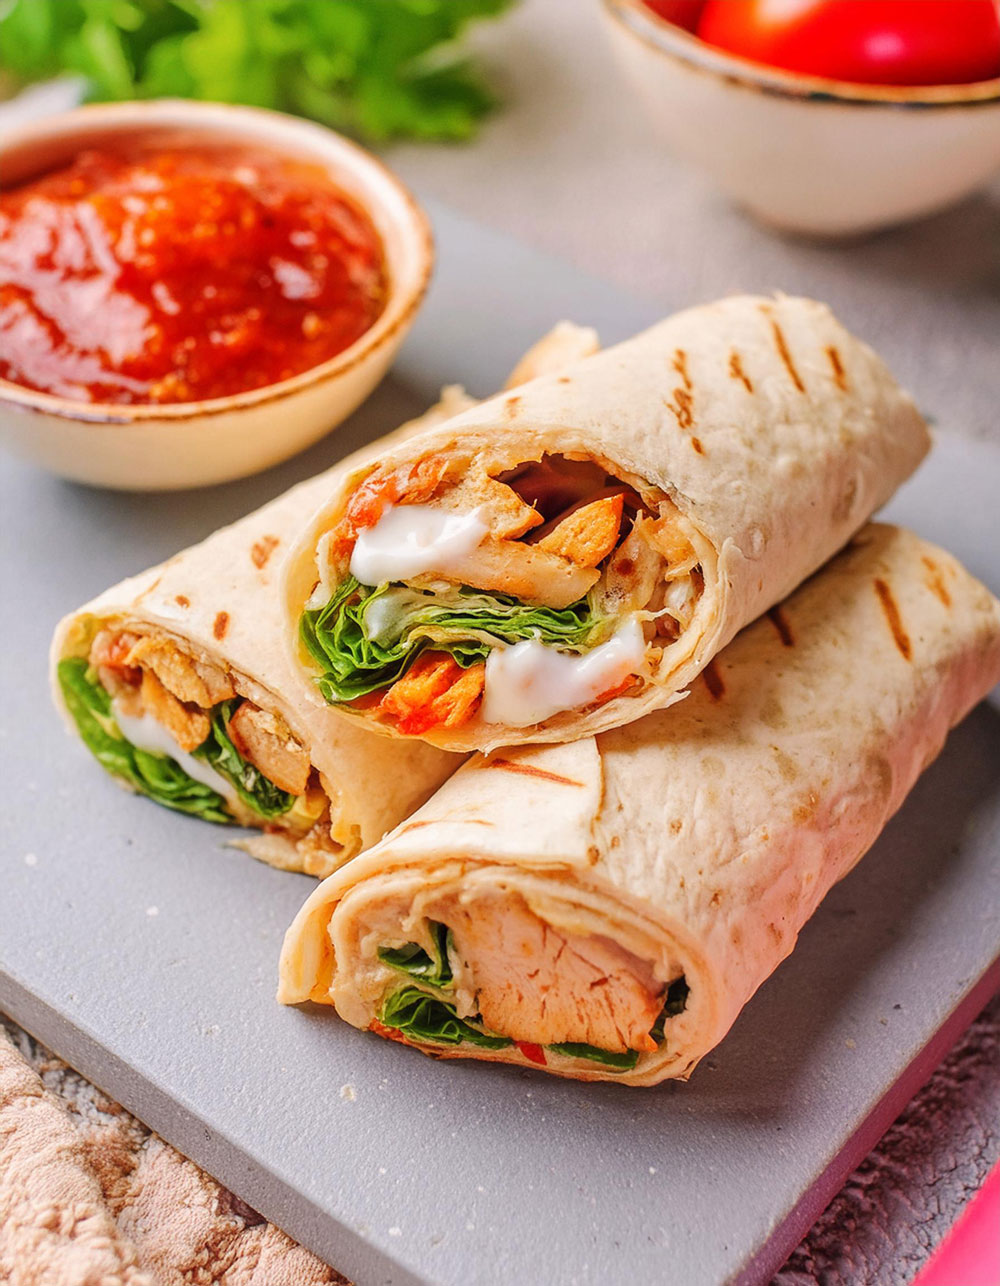 Easy to make herb & spice chicken wraps